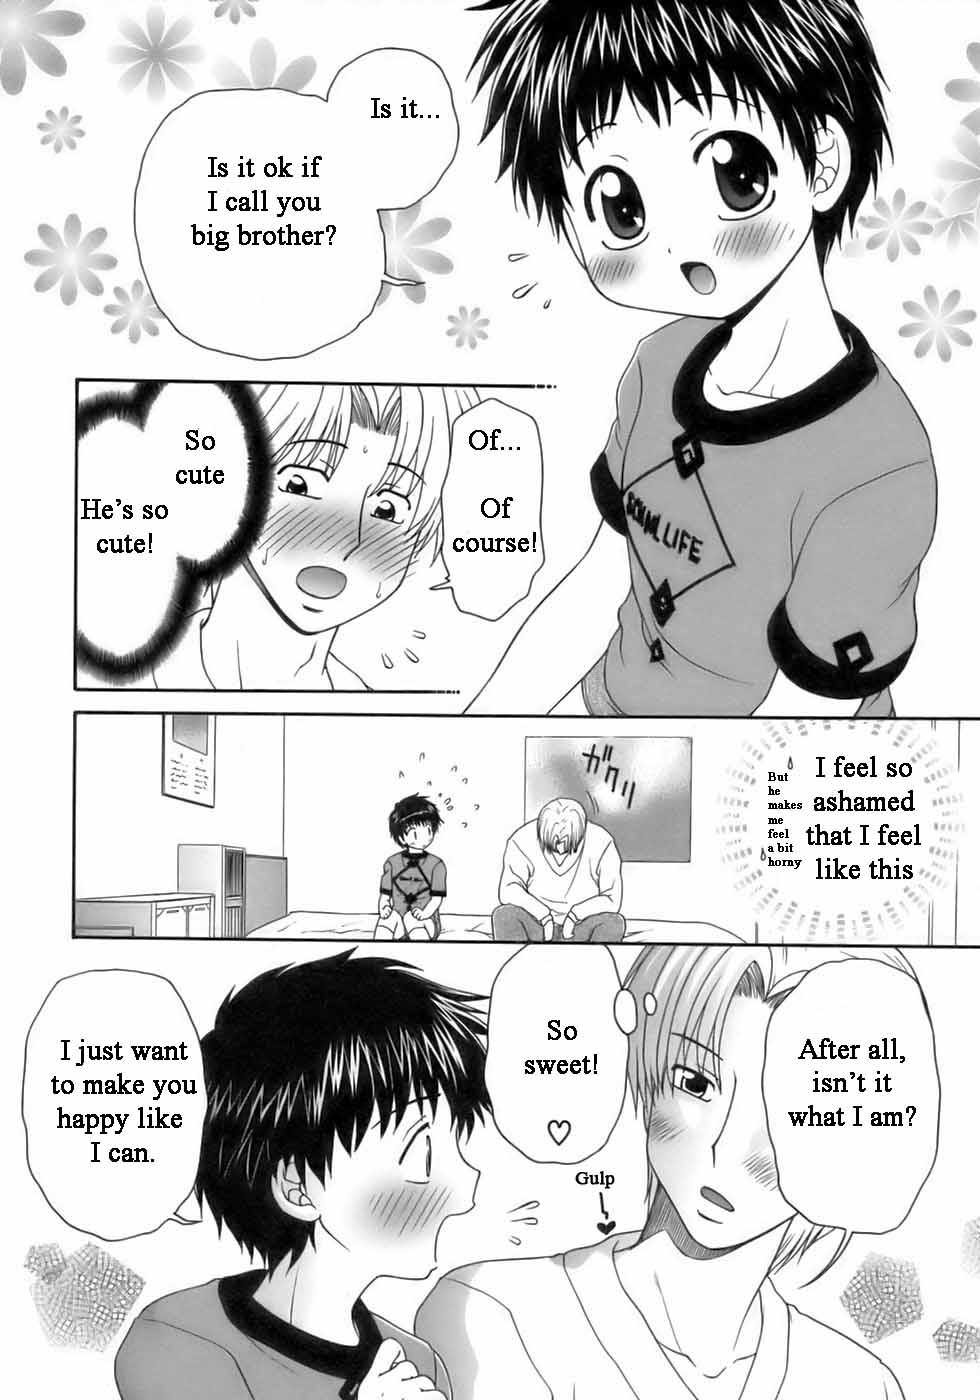 Cute Otouto ga Kita Hi | The Day My Brother Came Weird - Page 3